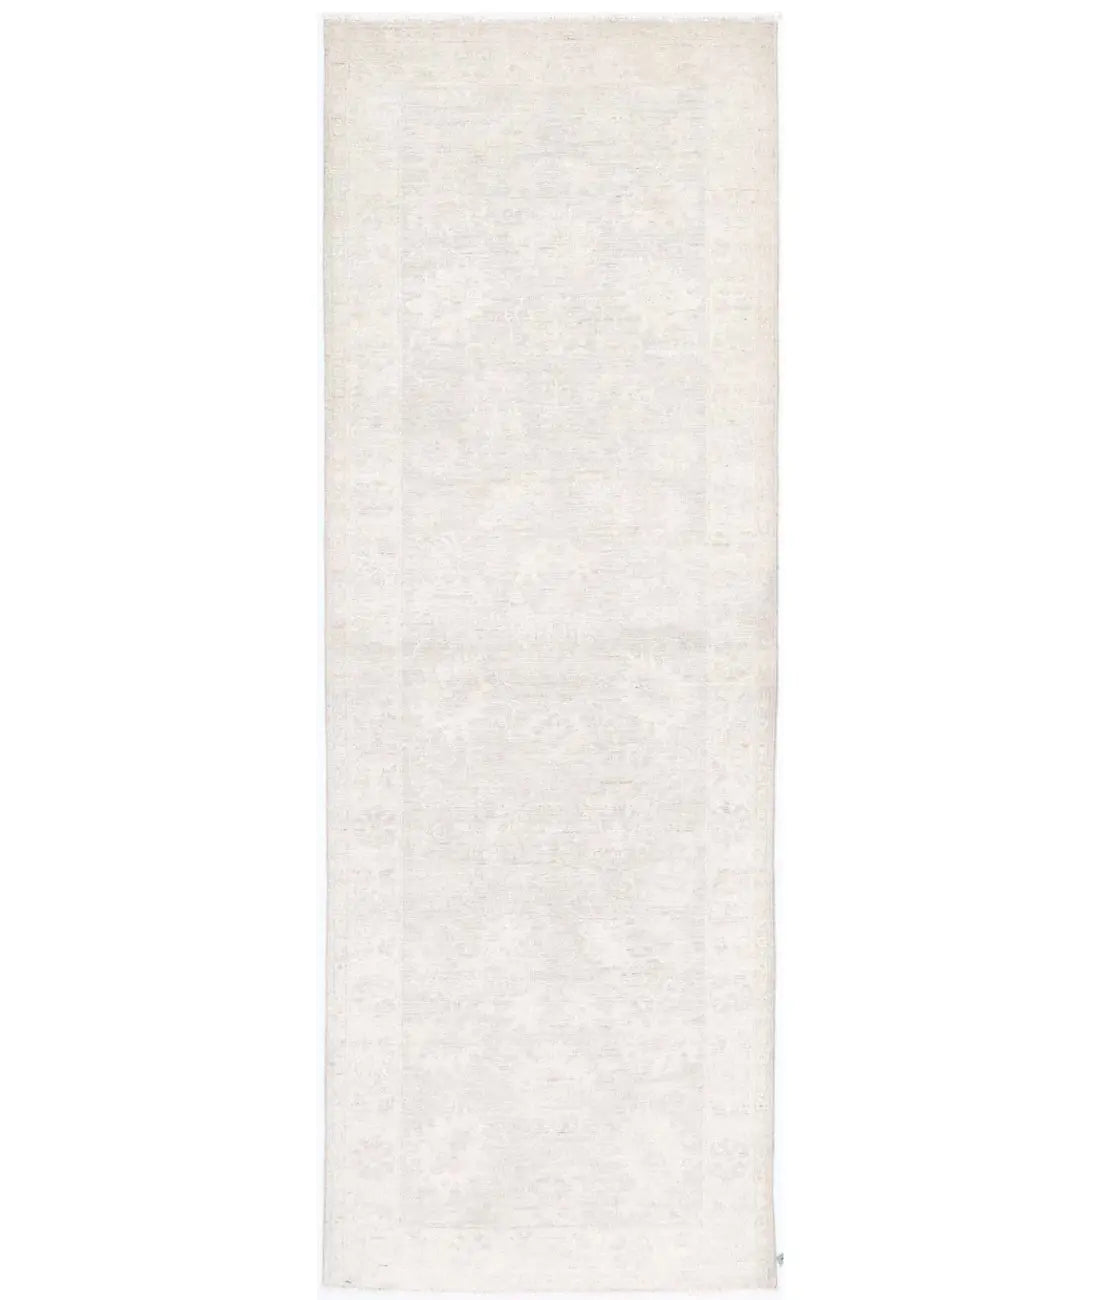 Hand Knotted Serenity Wool Rug - 2'6'' x 7'11''